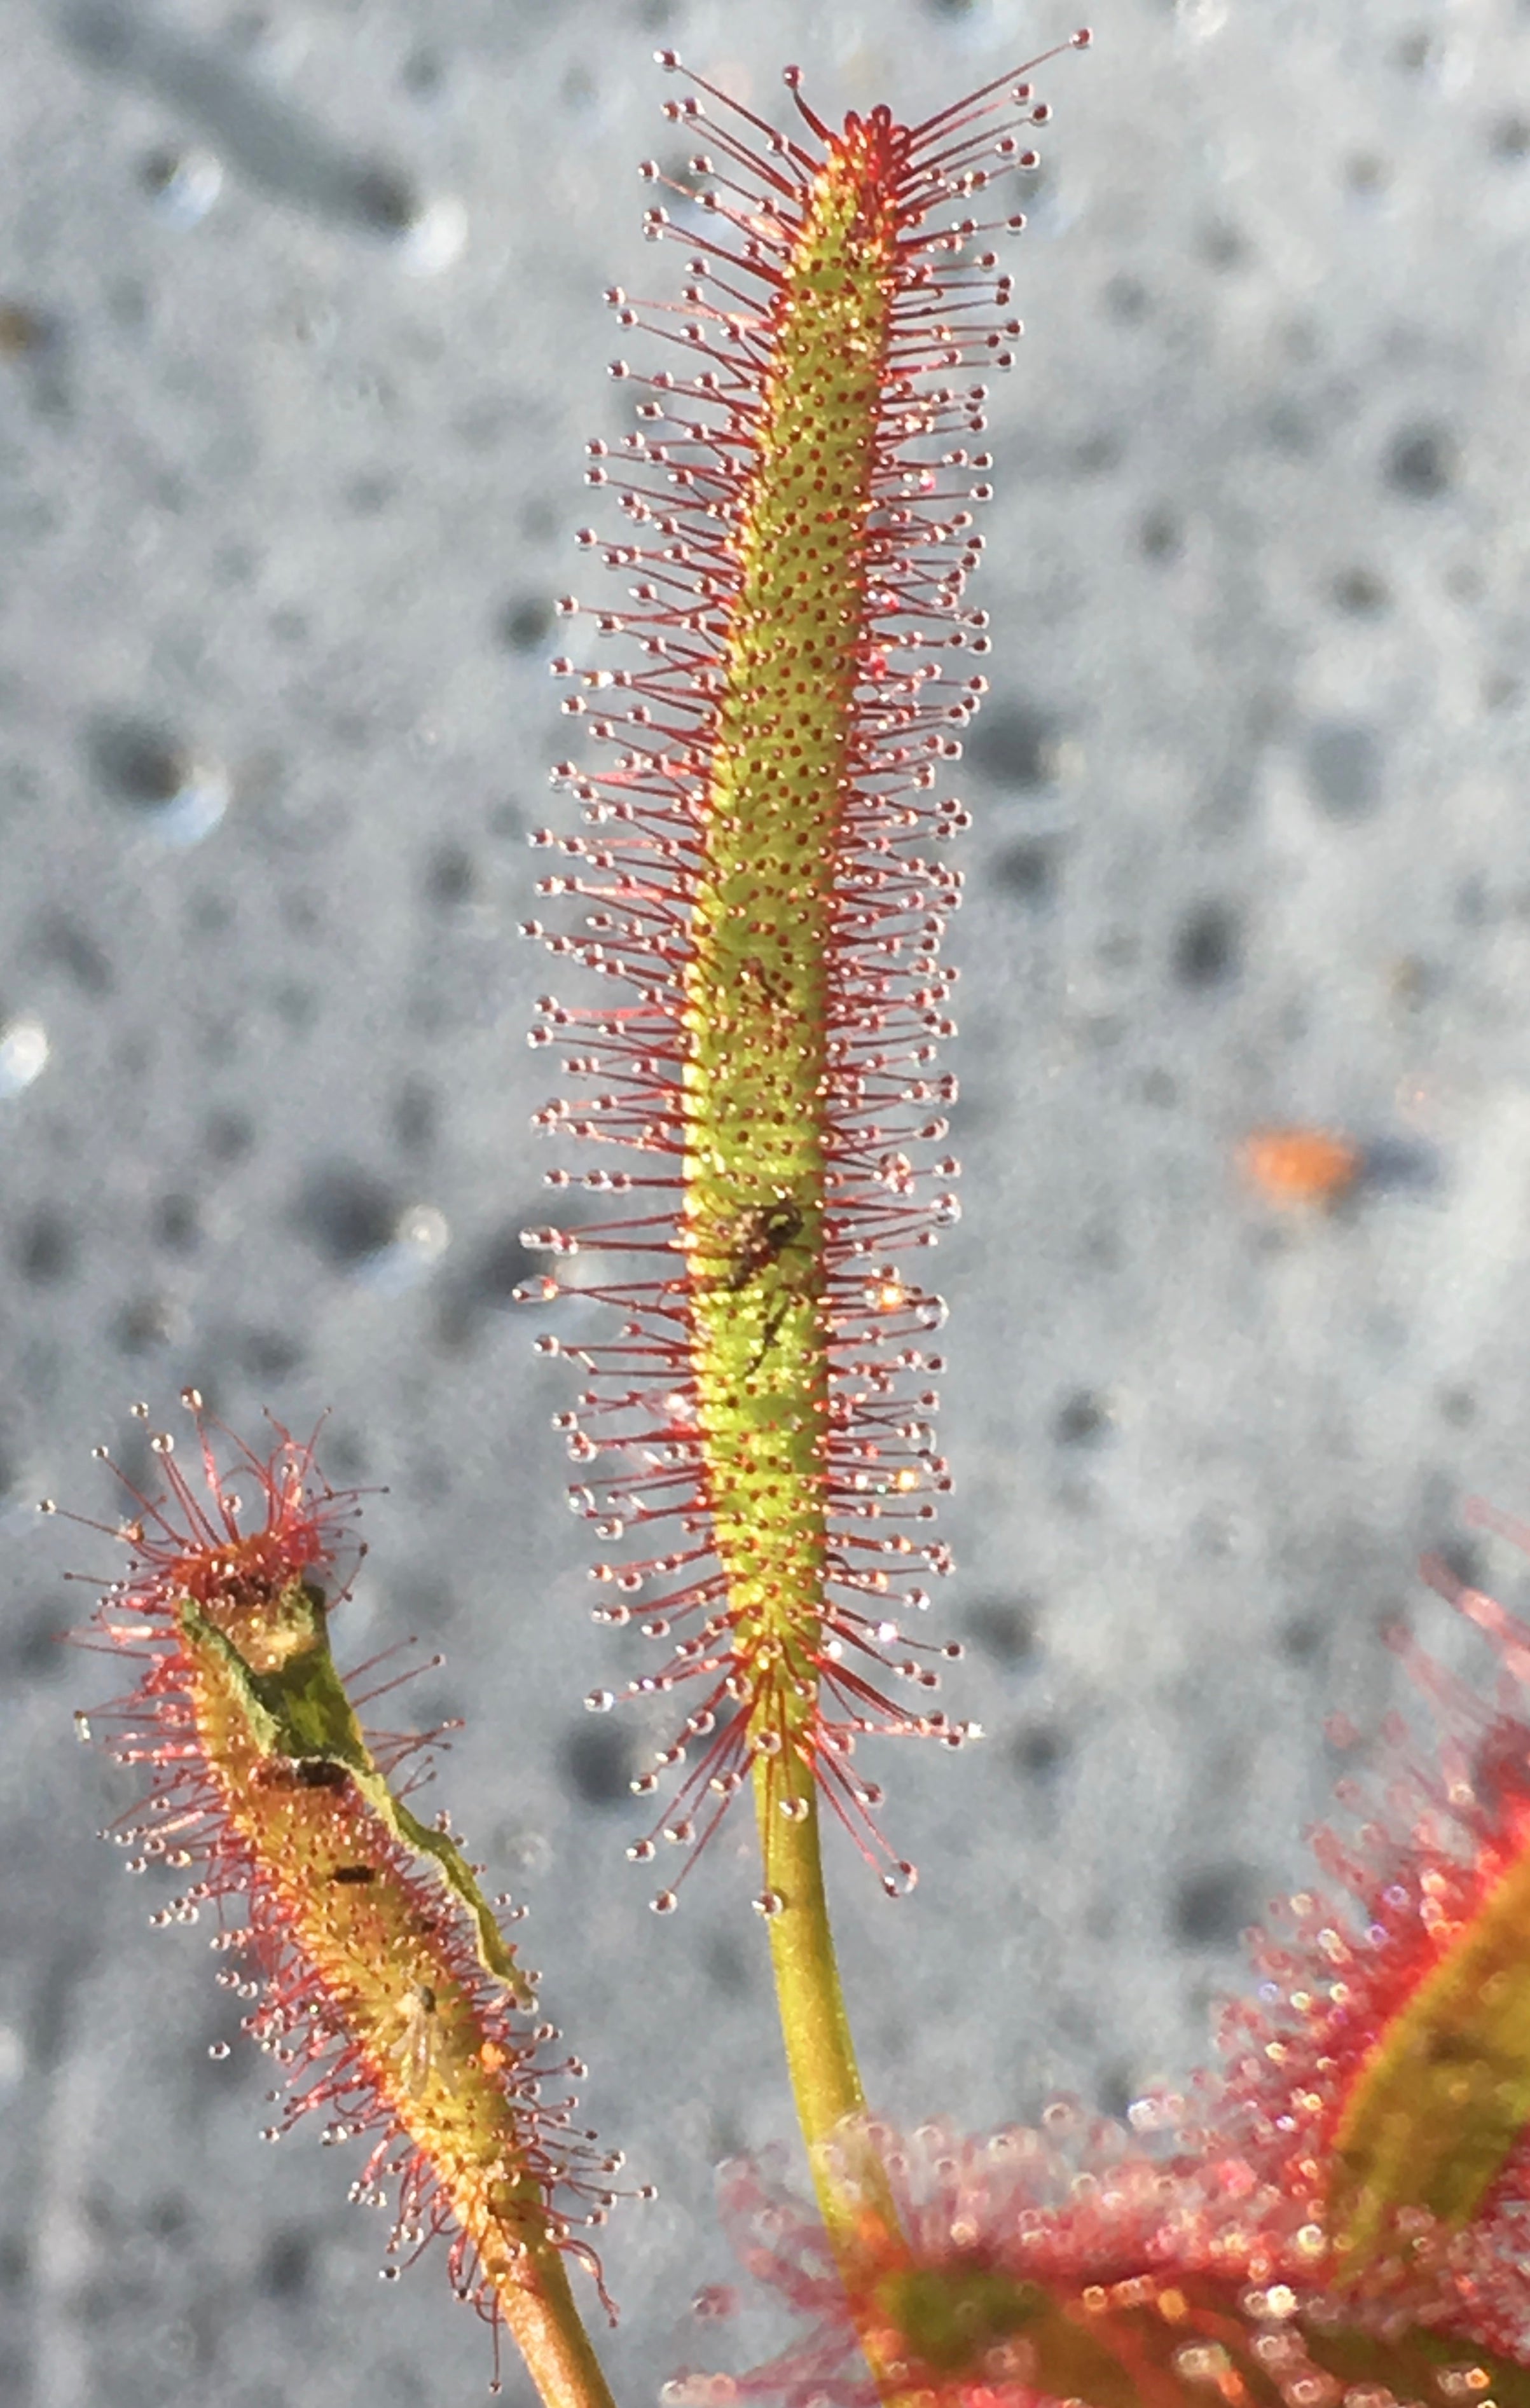 Drosera capensis 'Red' (Cape Sundew 'Red')